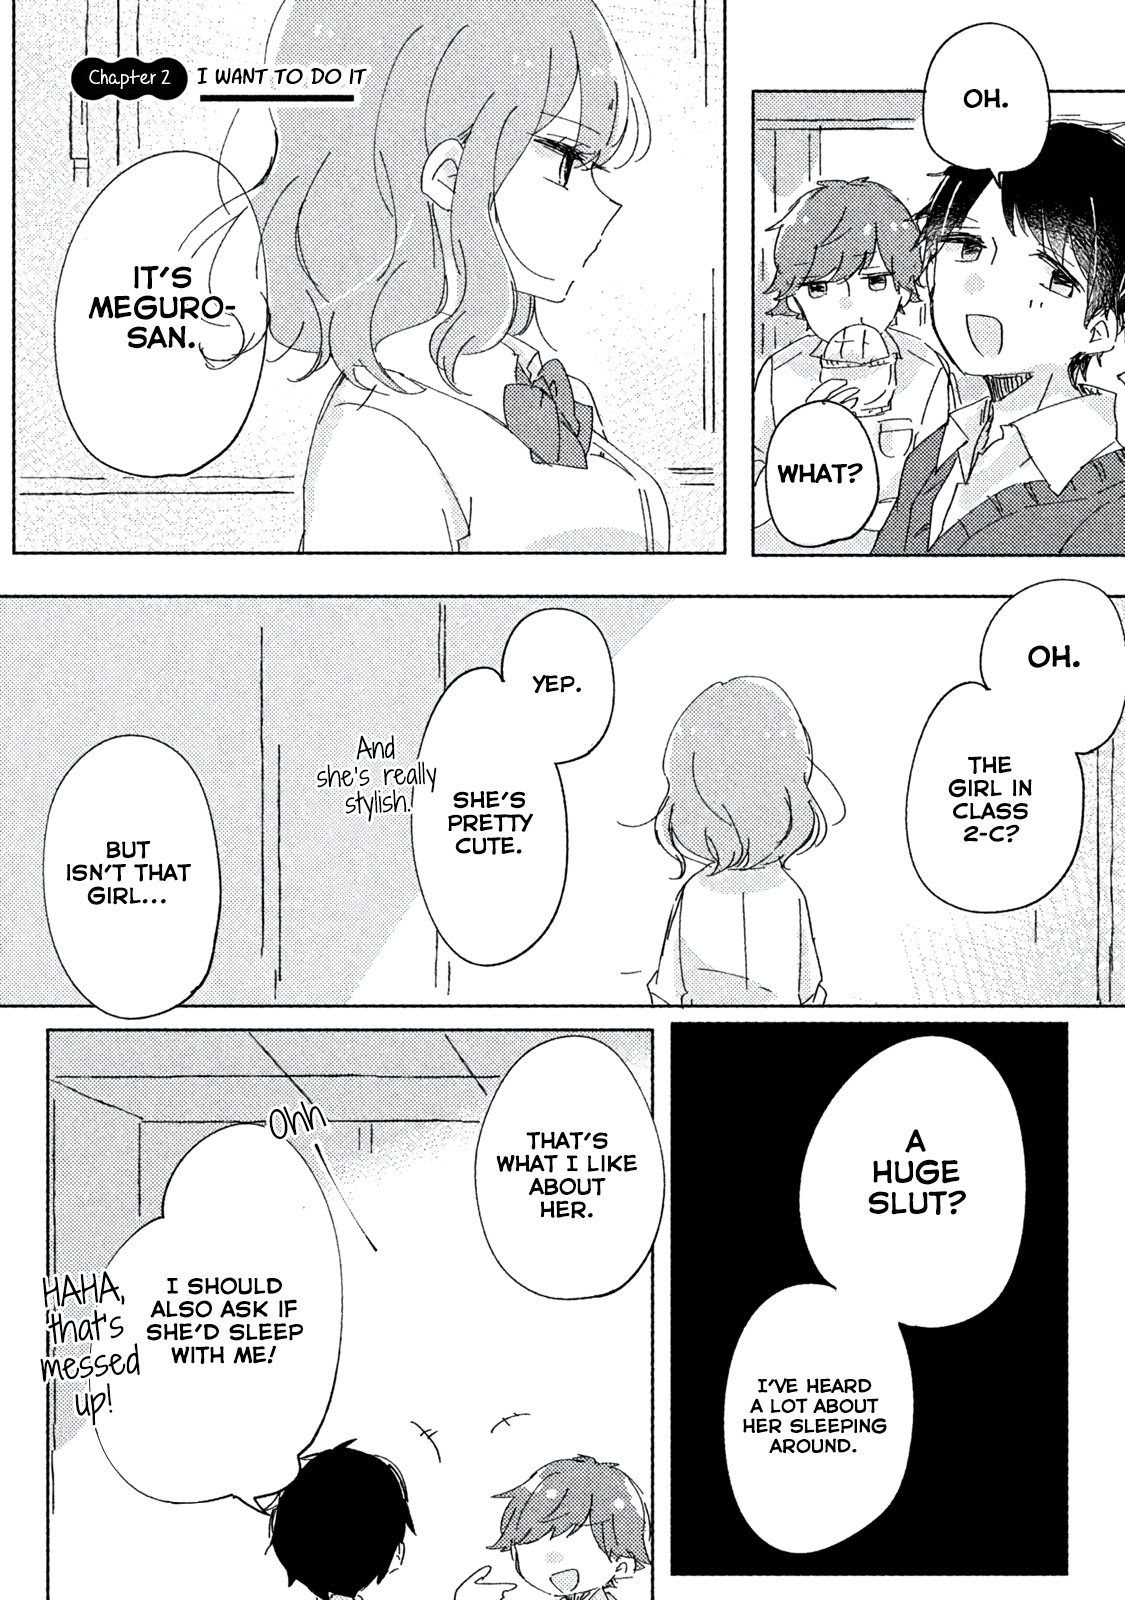 It's Not Meguro-San's First Time Vol.1 Chapter 2: I Want To Do It - Picture 1